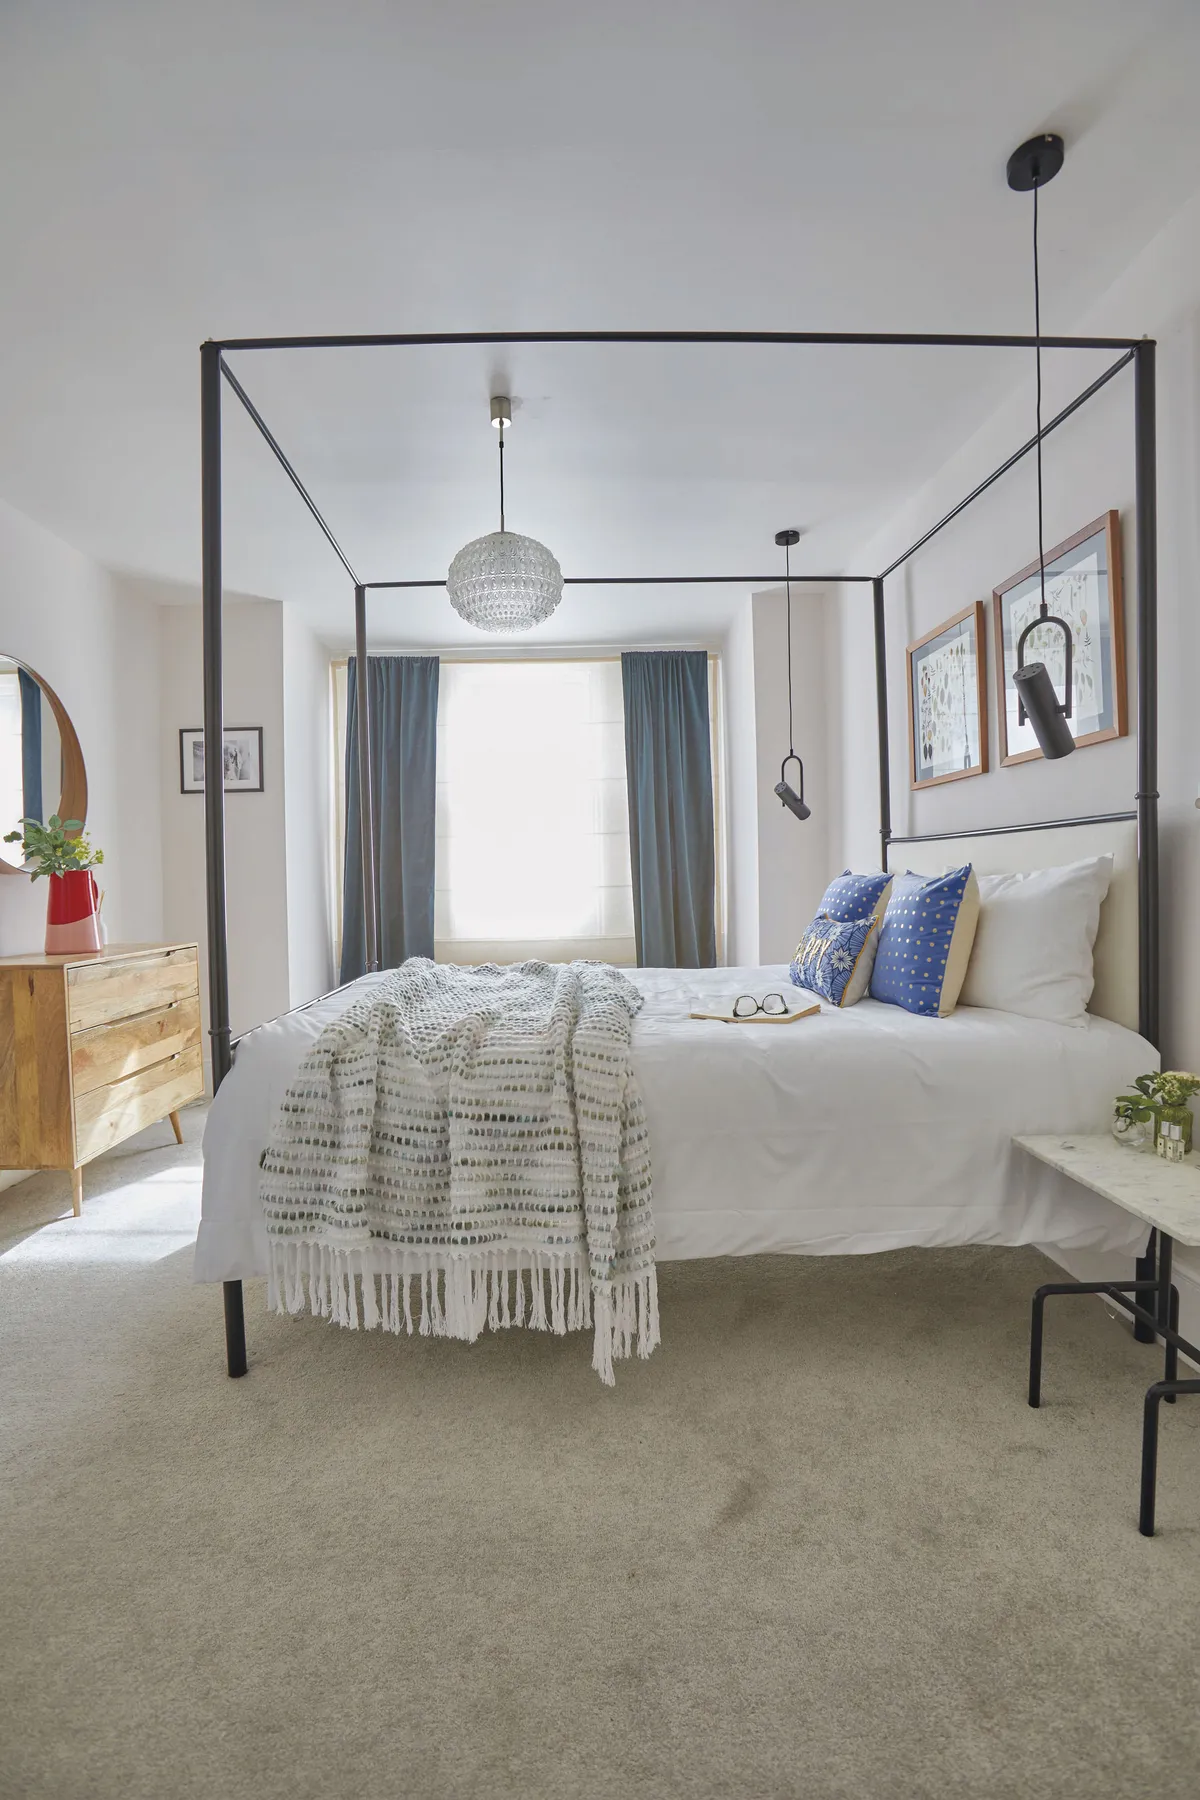 To add personality to the bedroom, Shrez has dressed the bed in beaded cushions by Oliver Bonas and a linen throw from HomeSense. She chose a roomy chest of drawers from Swoon Editions and hung the Stockholm mirror from IKEA above it